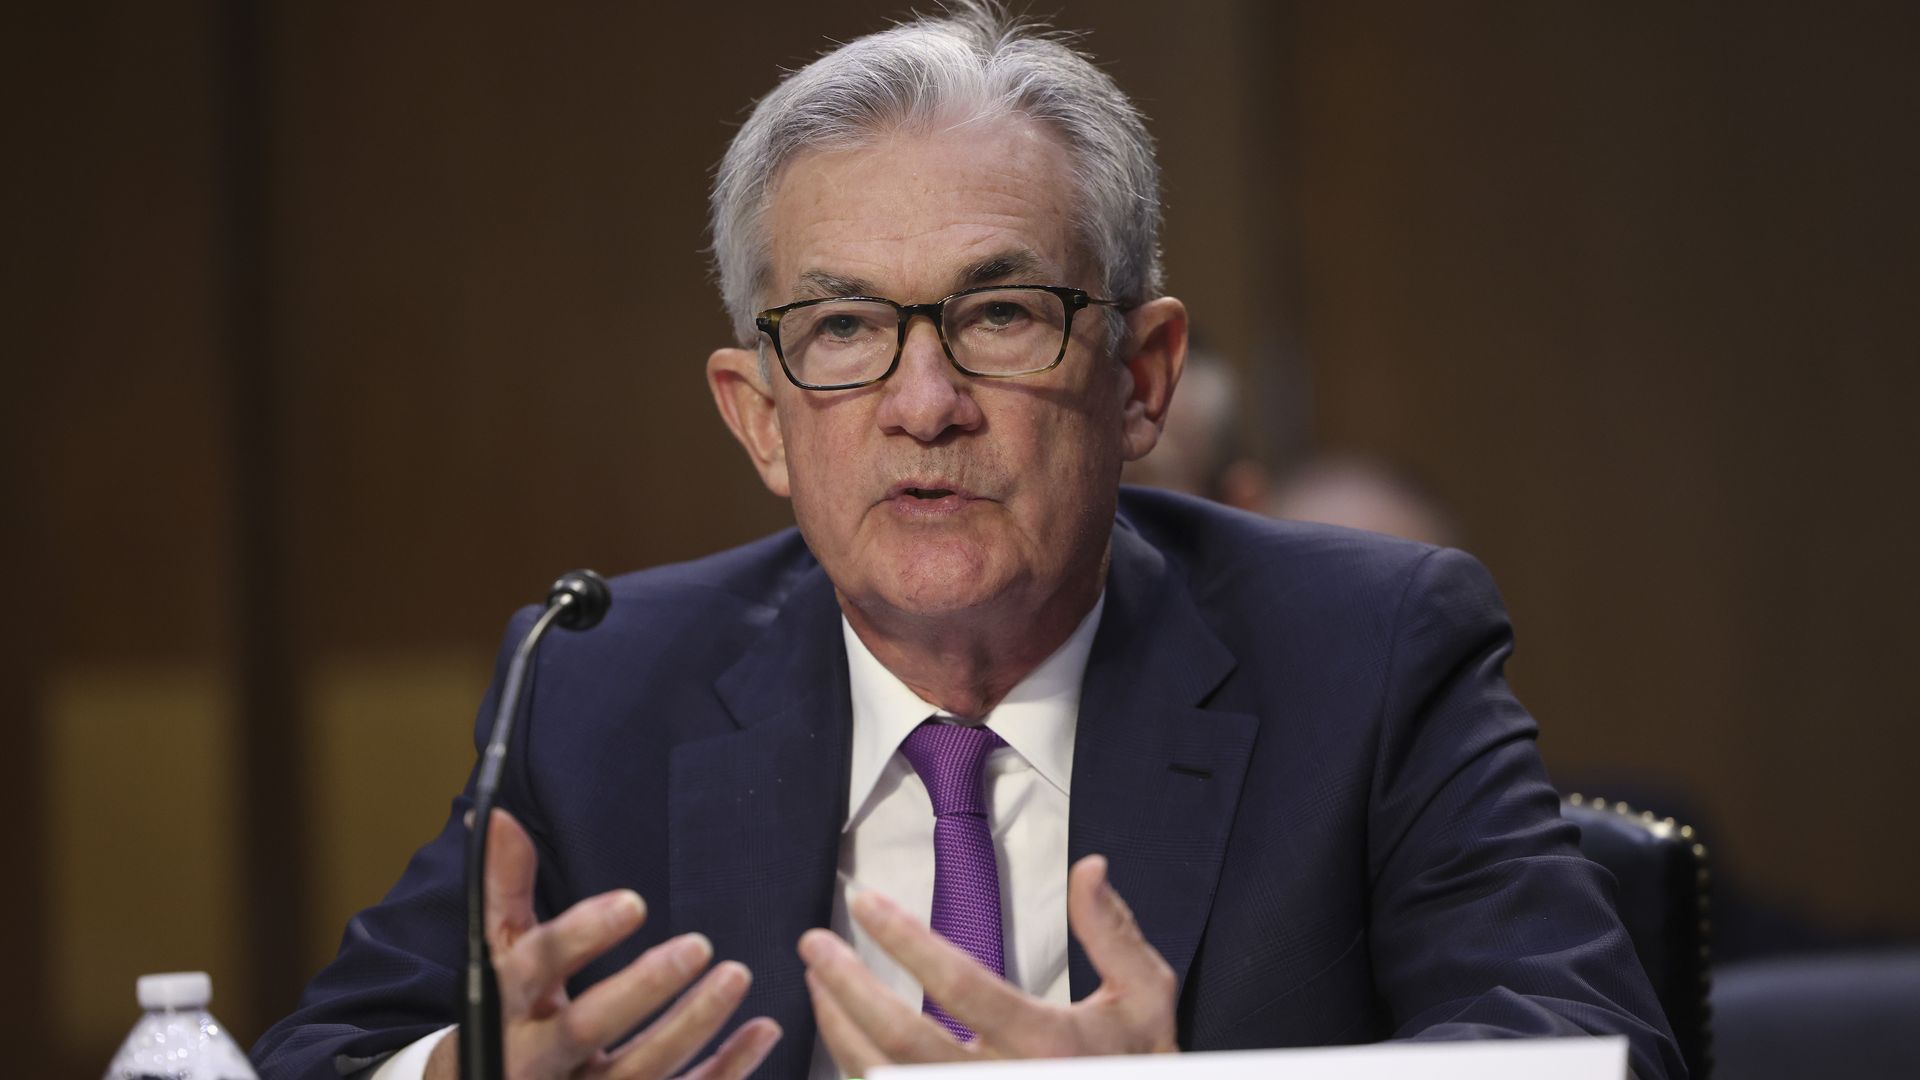 Federal Reserve Chairman Jerome Powell testifies during a Senate Banking, Housing and Urban Affairs Committee